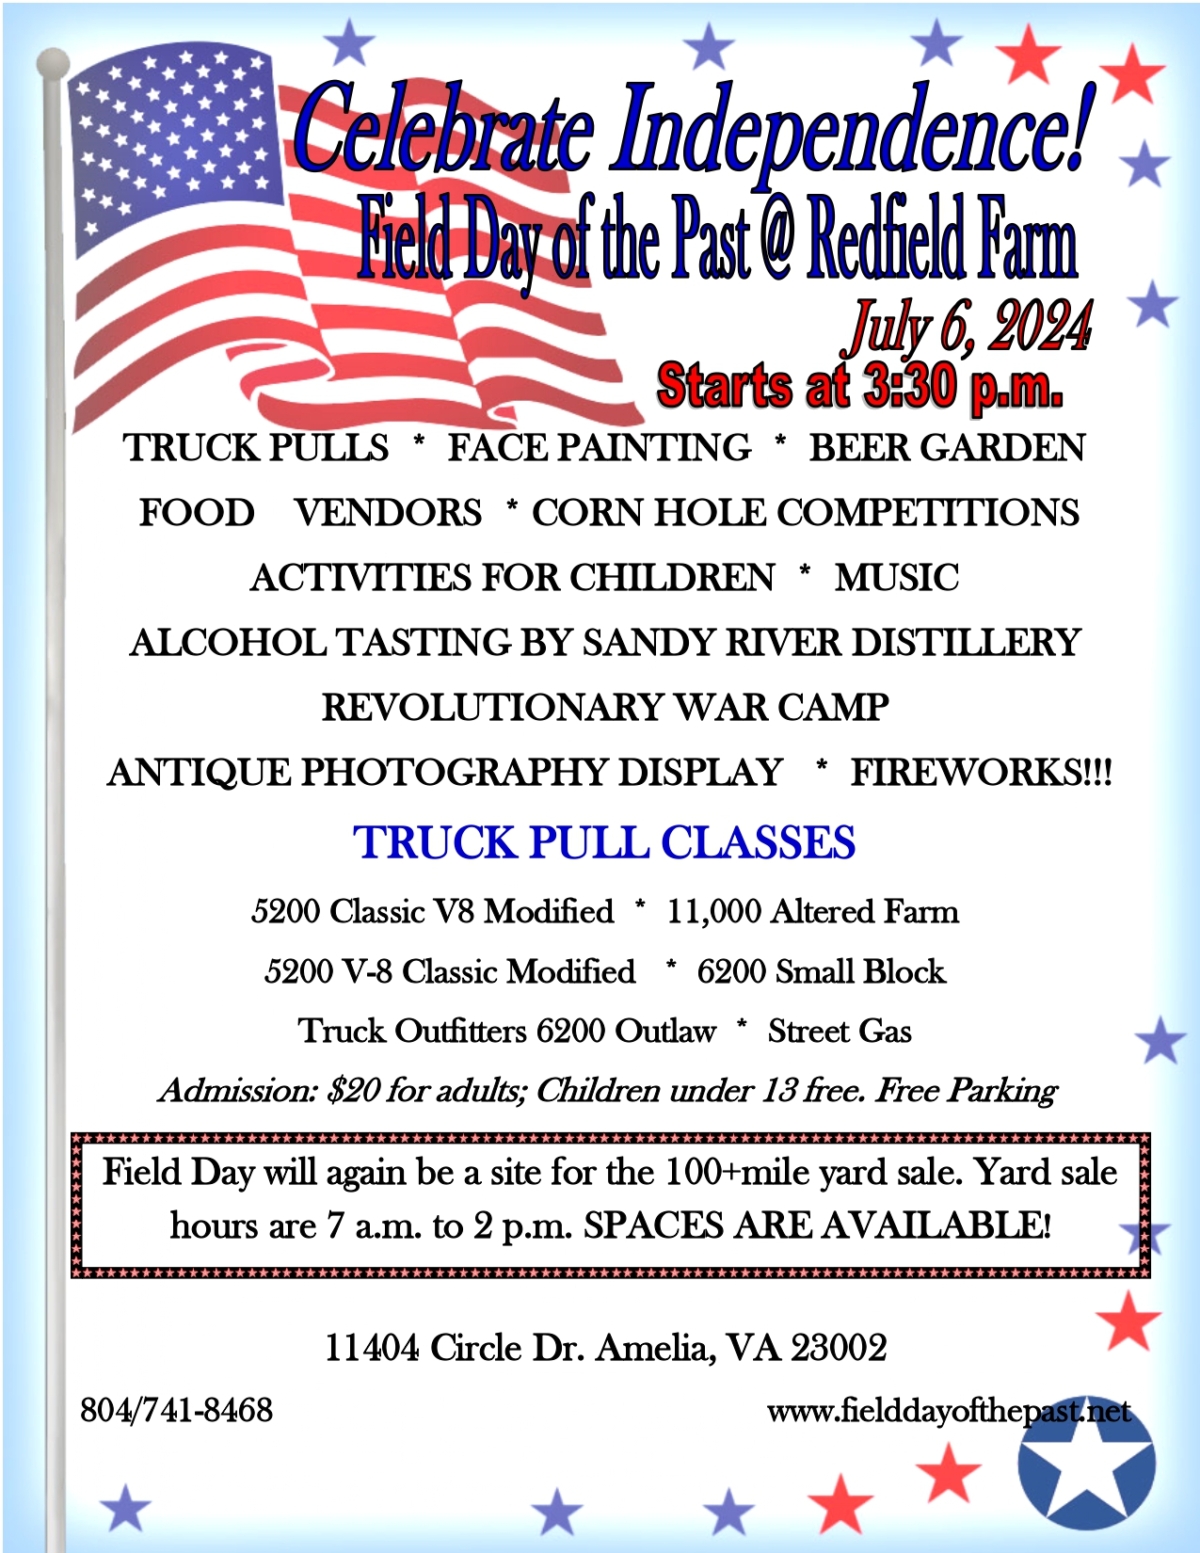 Celebrate Independence! Field Day of the Past at Redfield Farm- July 6, 2024 starts at 3:30 p.m.